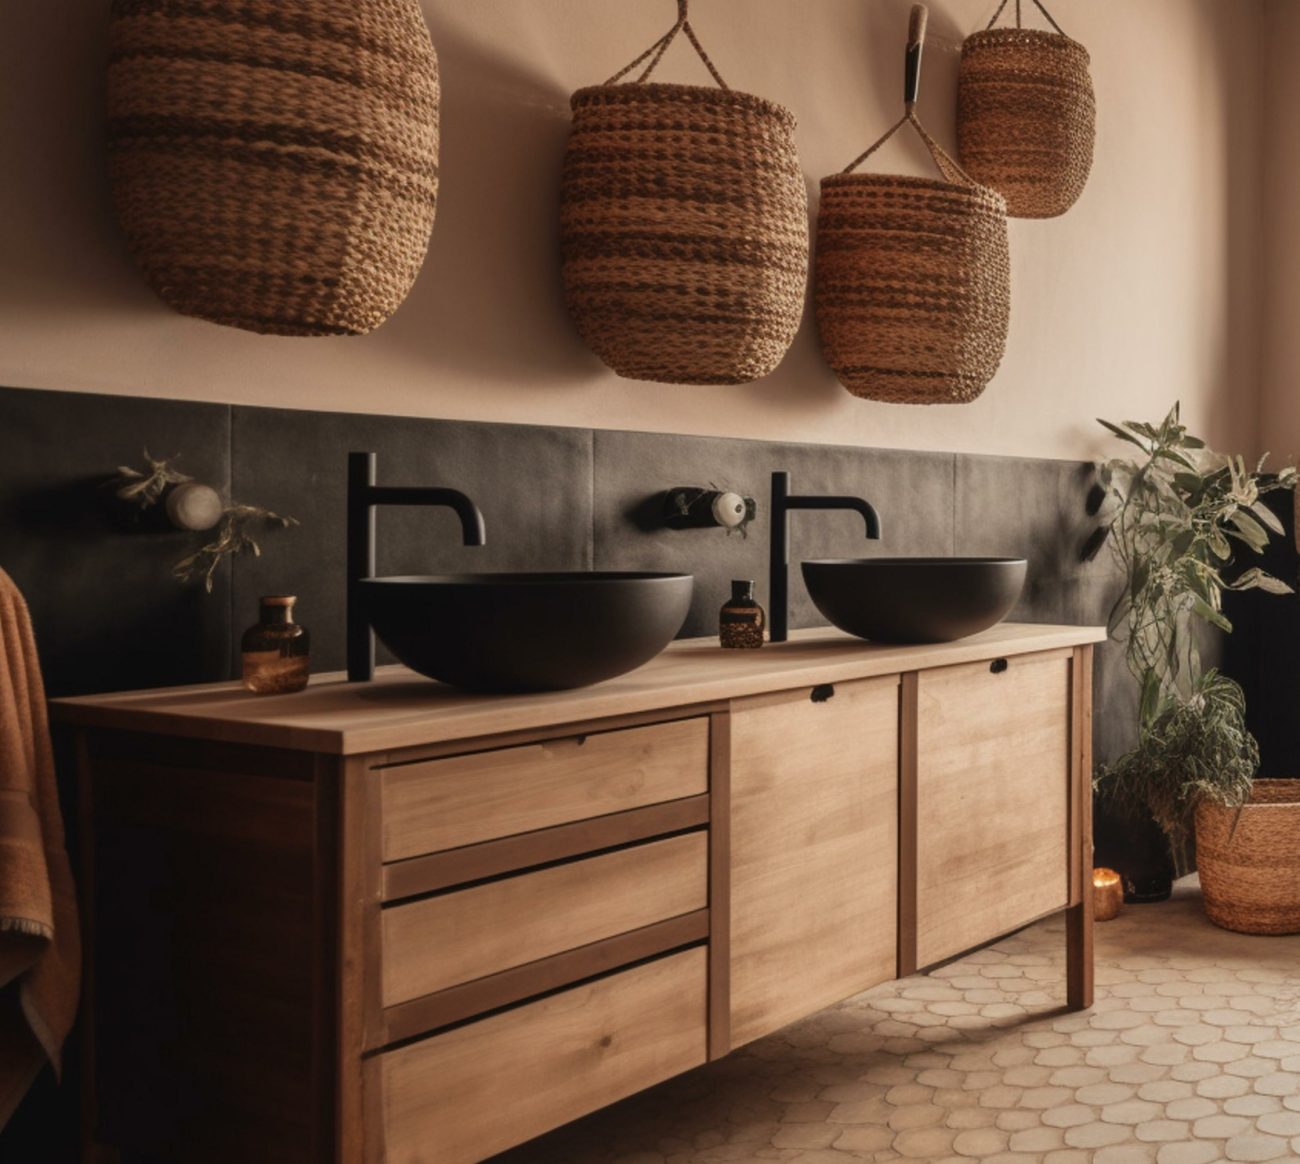 Chic modern rustic bathroom with black terracotta tiles and aged wooden vanity